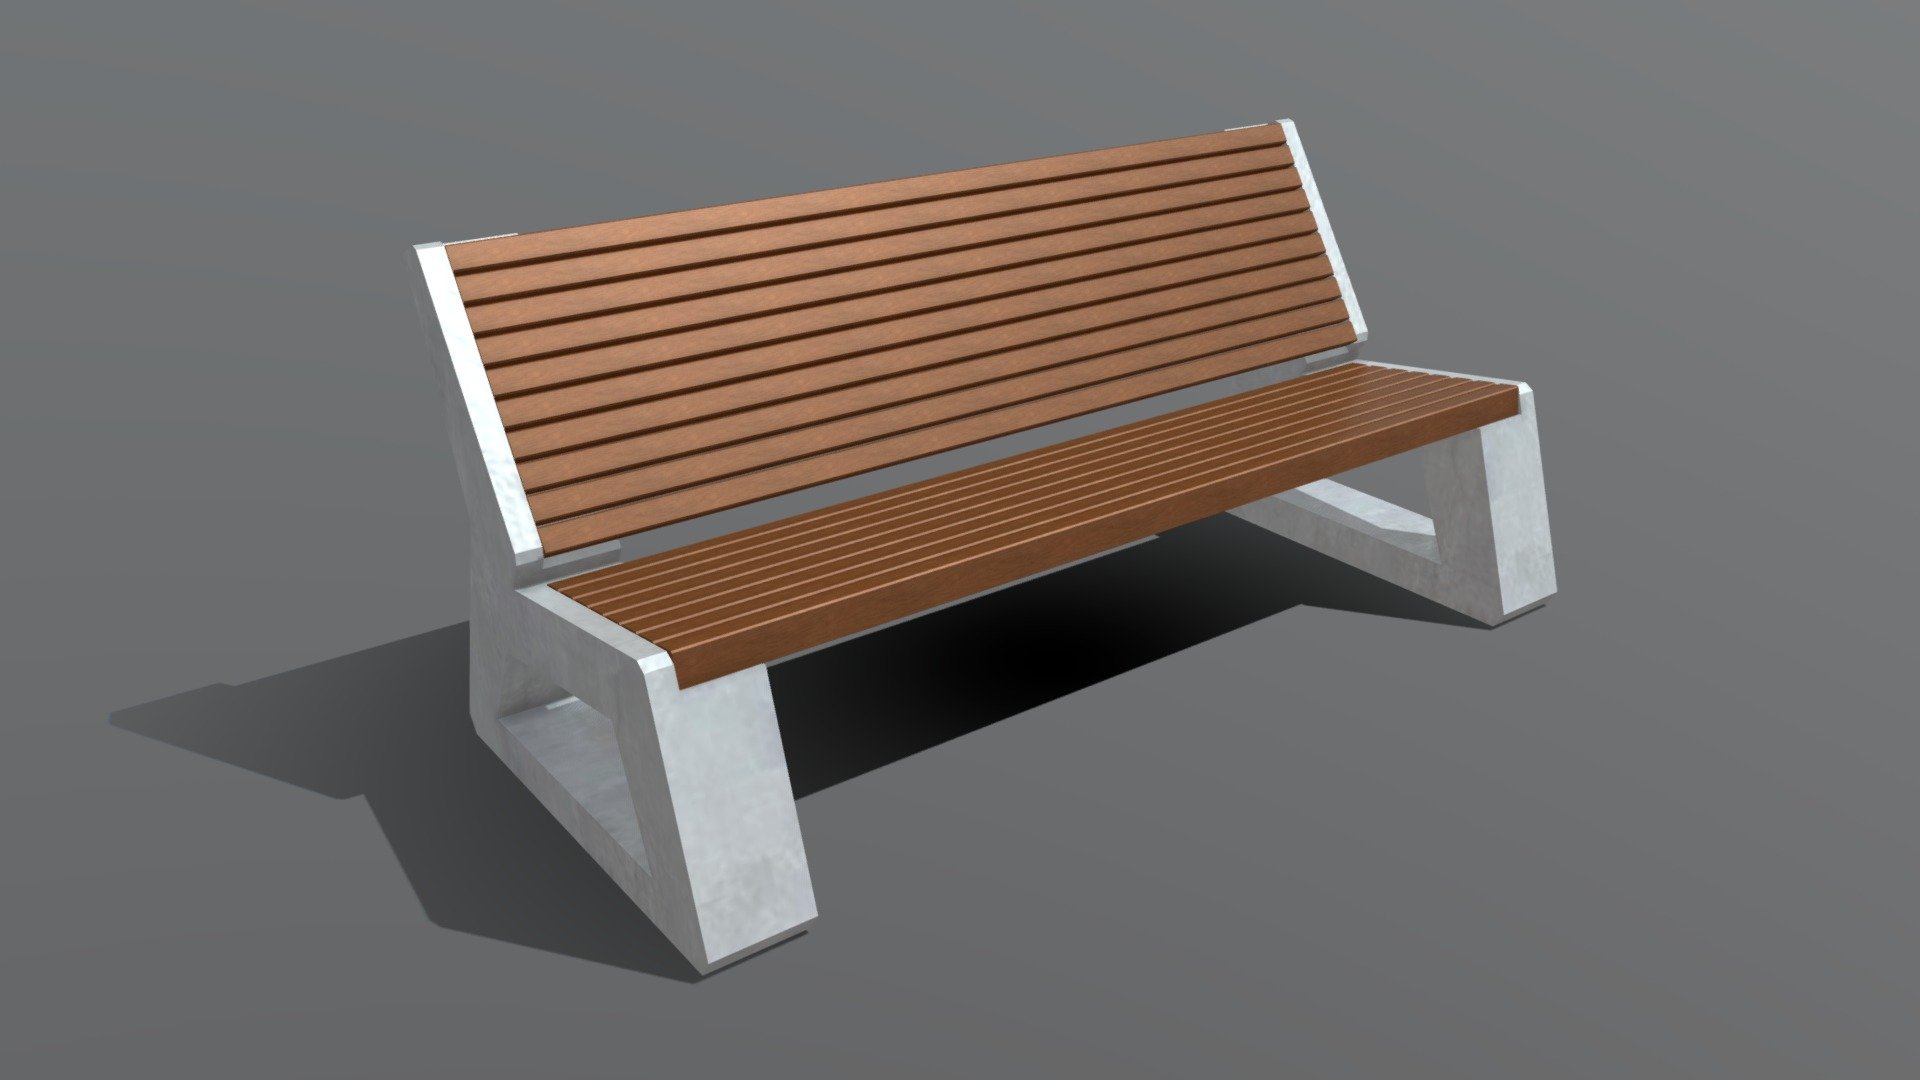 Park bench-a bench for recreation (reinforced concrete, vandal-proof) with wooden slatted flooring 3d model